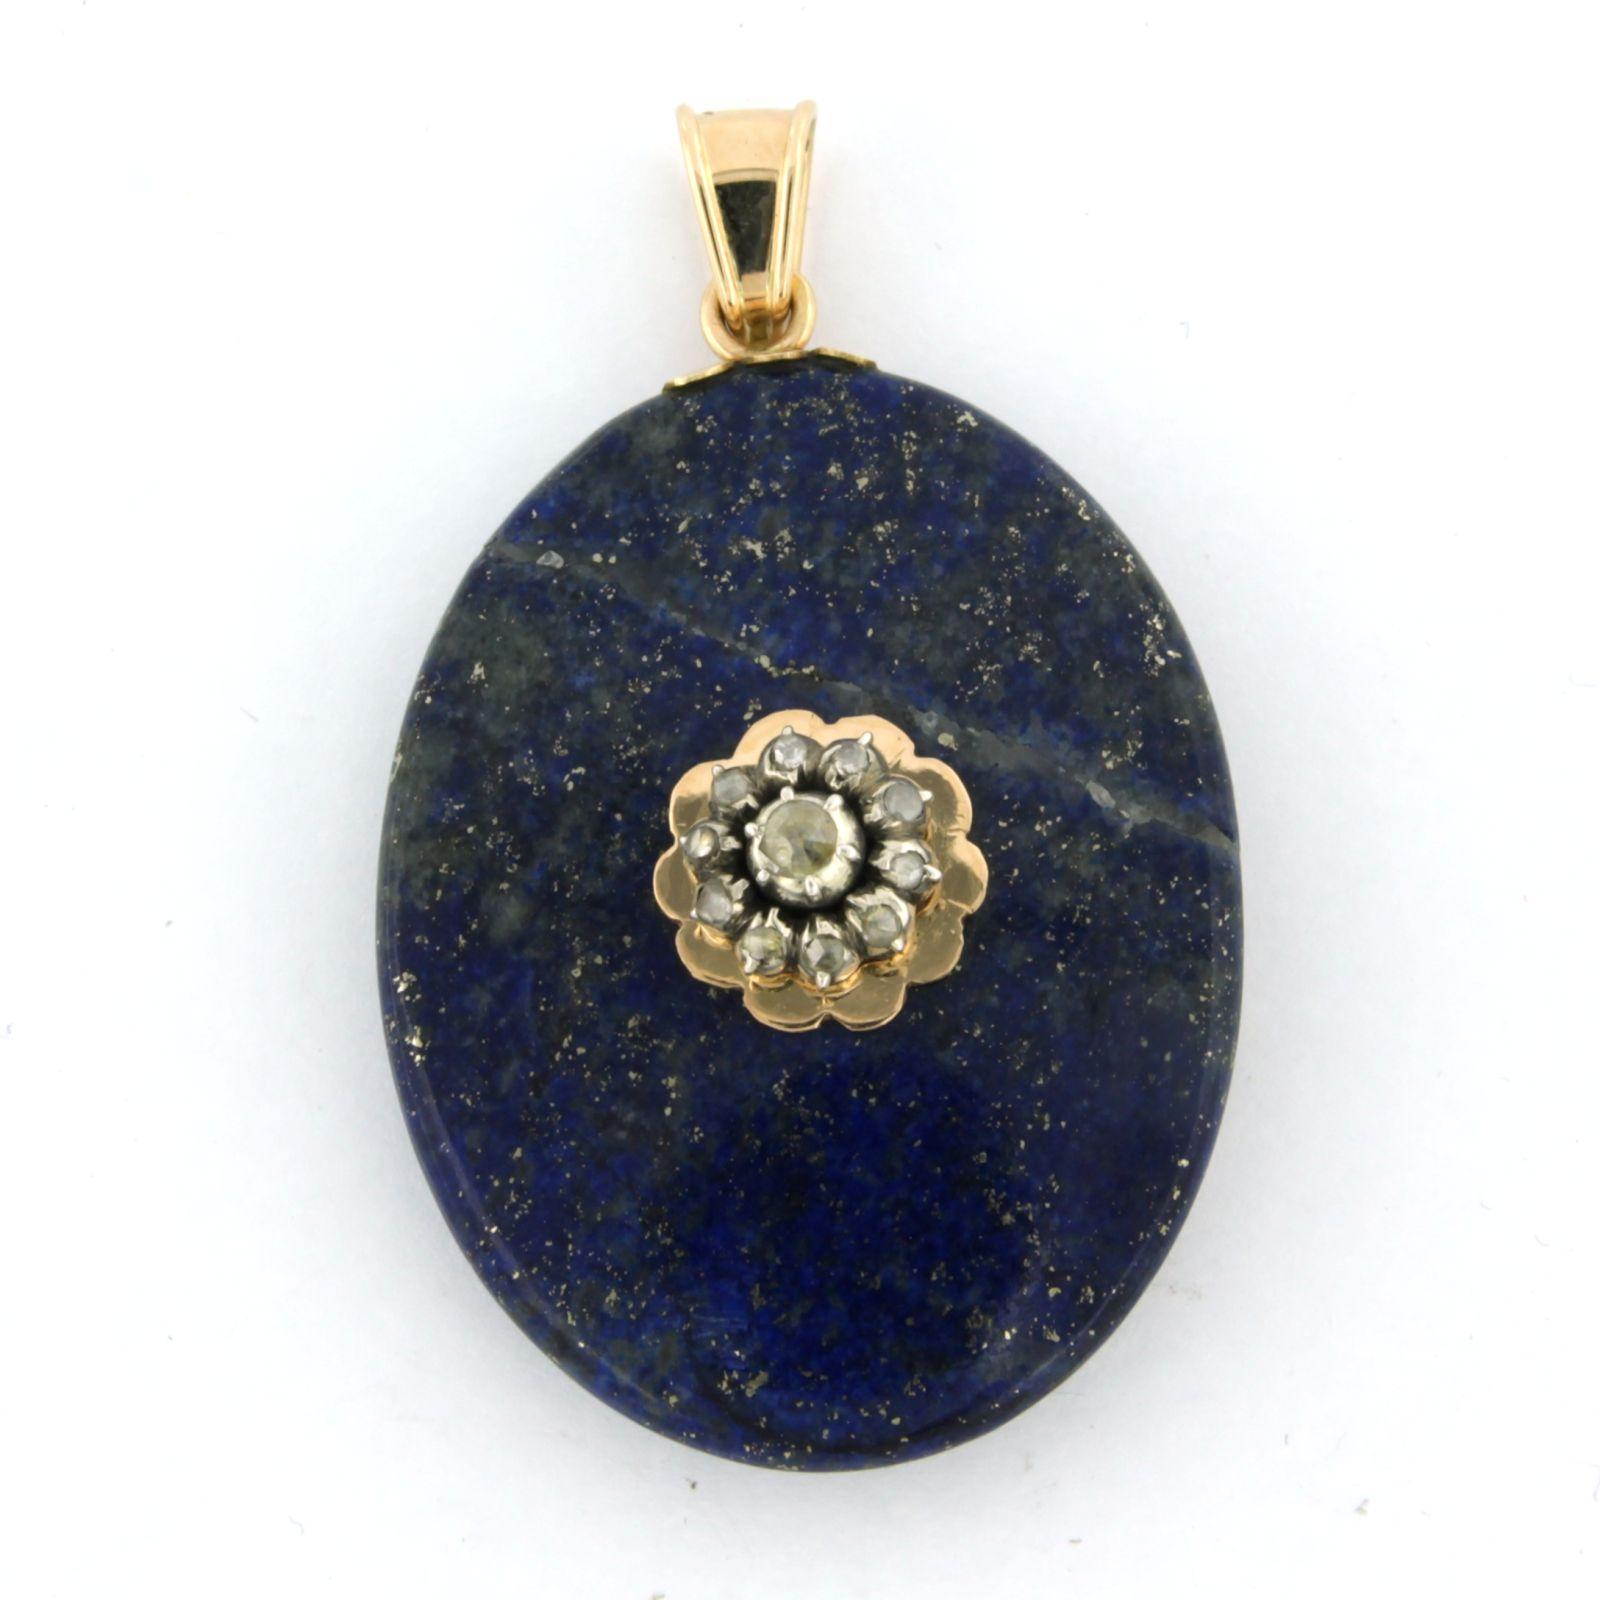 14k gold medallion pendant with lapis lazuli and rose diamonds set on silver. 0.15ct – G/H – SI

Detailed description

the size of the pendant is 5.5 cm long by 3.3 cm wide

weight 18.6 grams

set with

- 1 x 4.4 cm x 3.3 cm oval cut lais